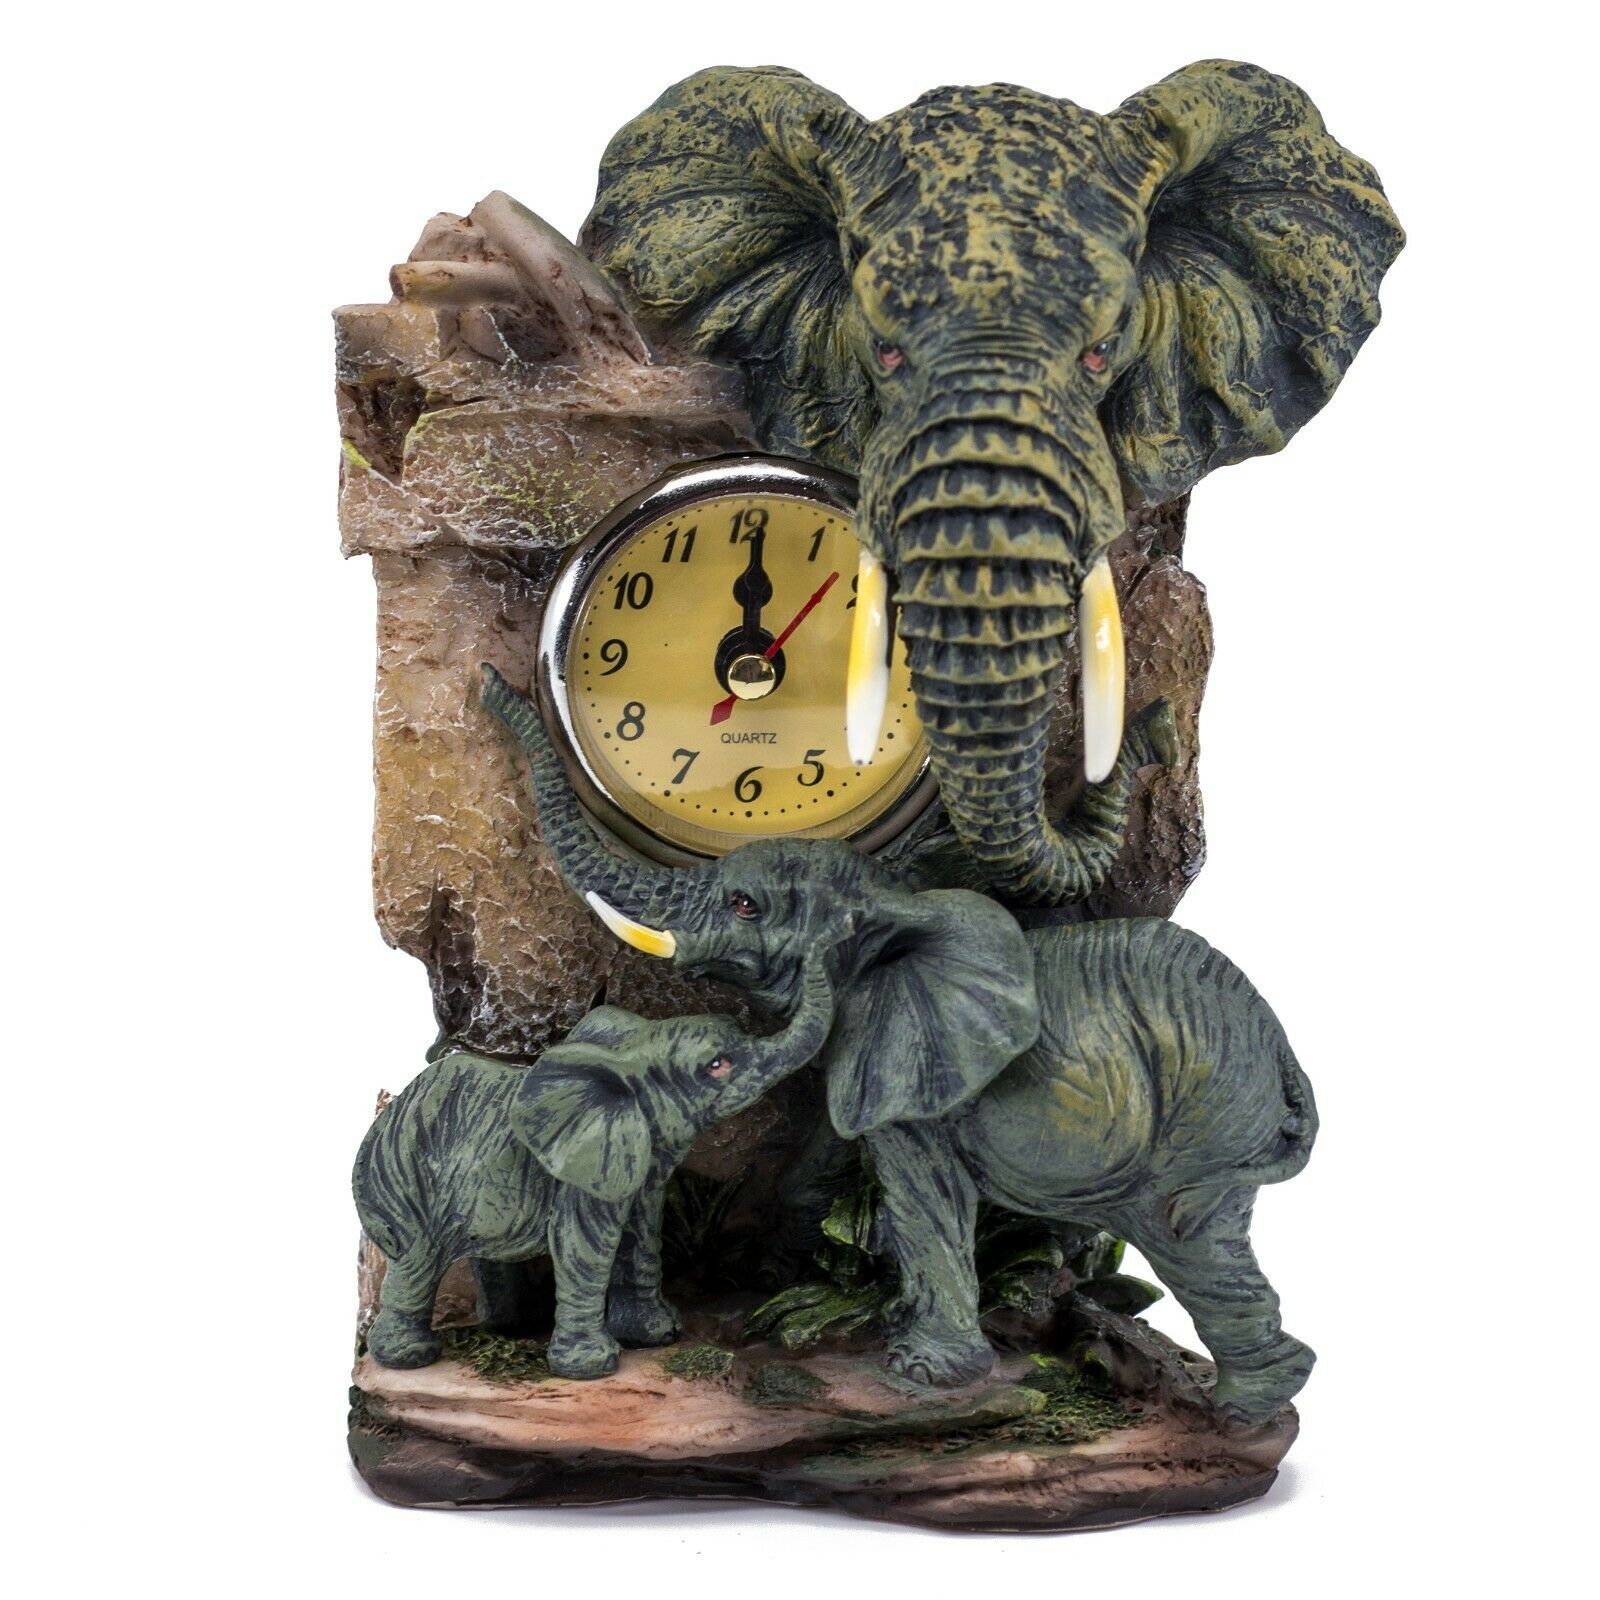 Elephant Mother With Baby Clock Figurine Resin 7 Inch High New In Box!